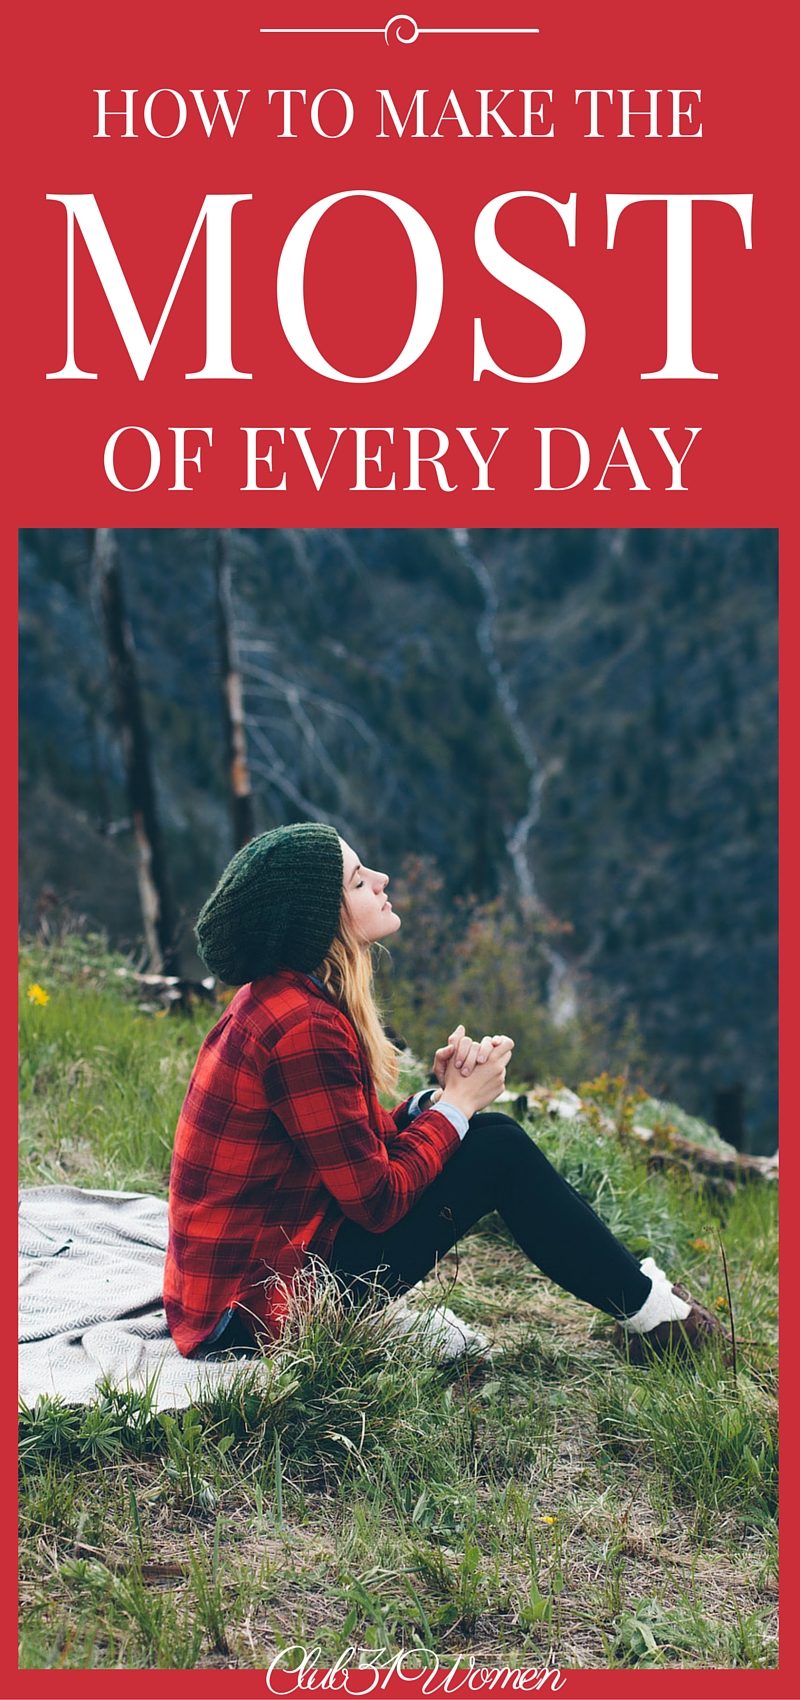 How to Make The Most Of Every Day